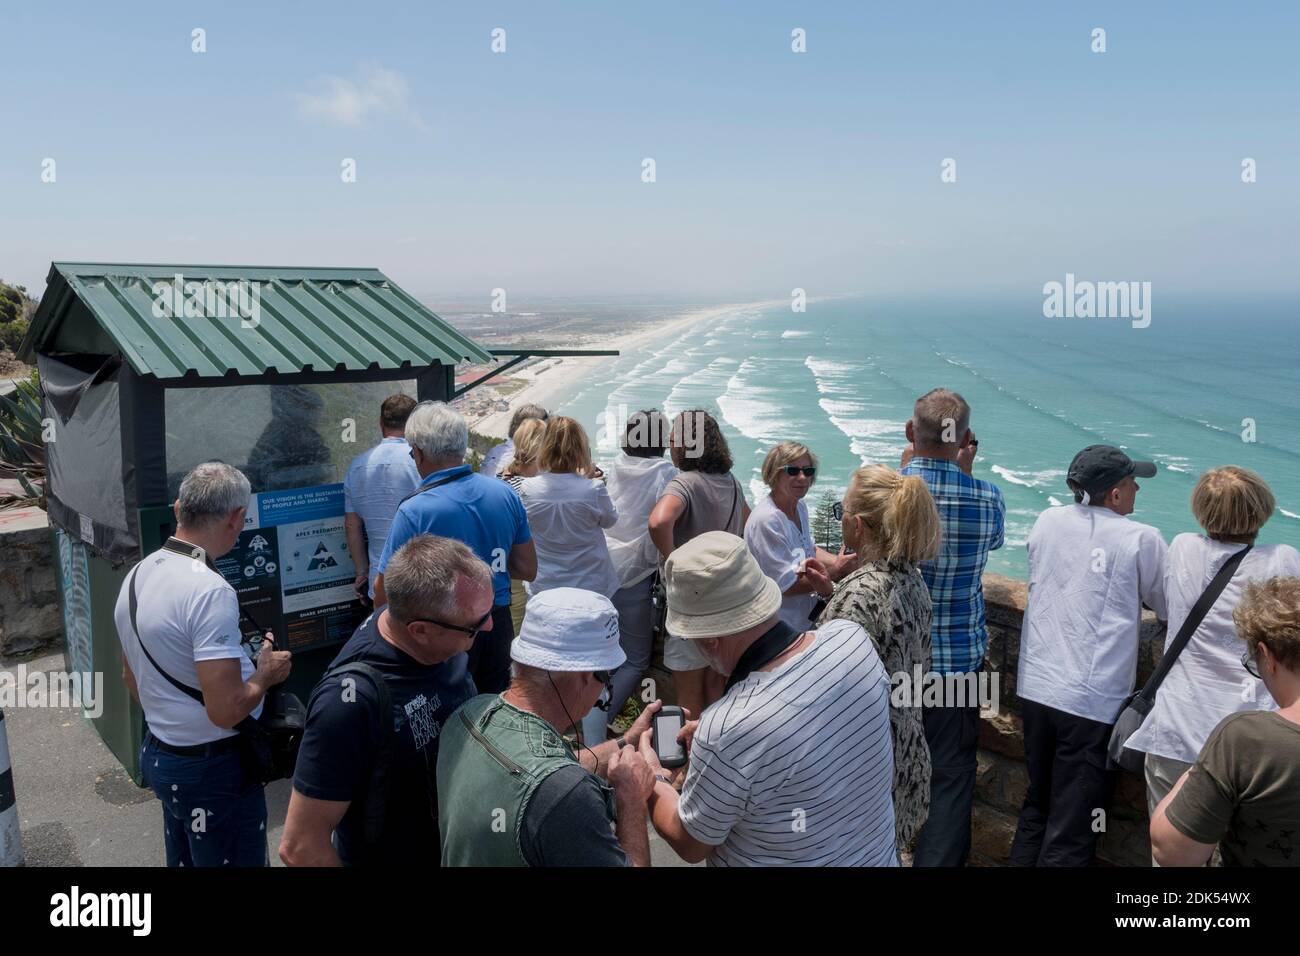 Tourists look over False Bay from the Shark Spotters shelter on Boyes Drive overlooking Muizenberg Beach, False Bay, Cape Town, South Africa. Stock Photo